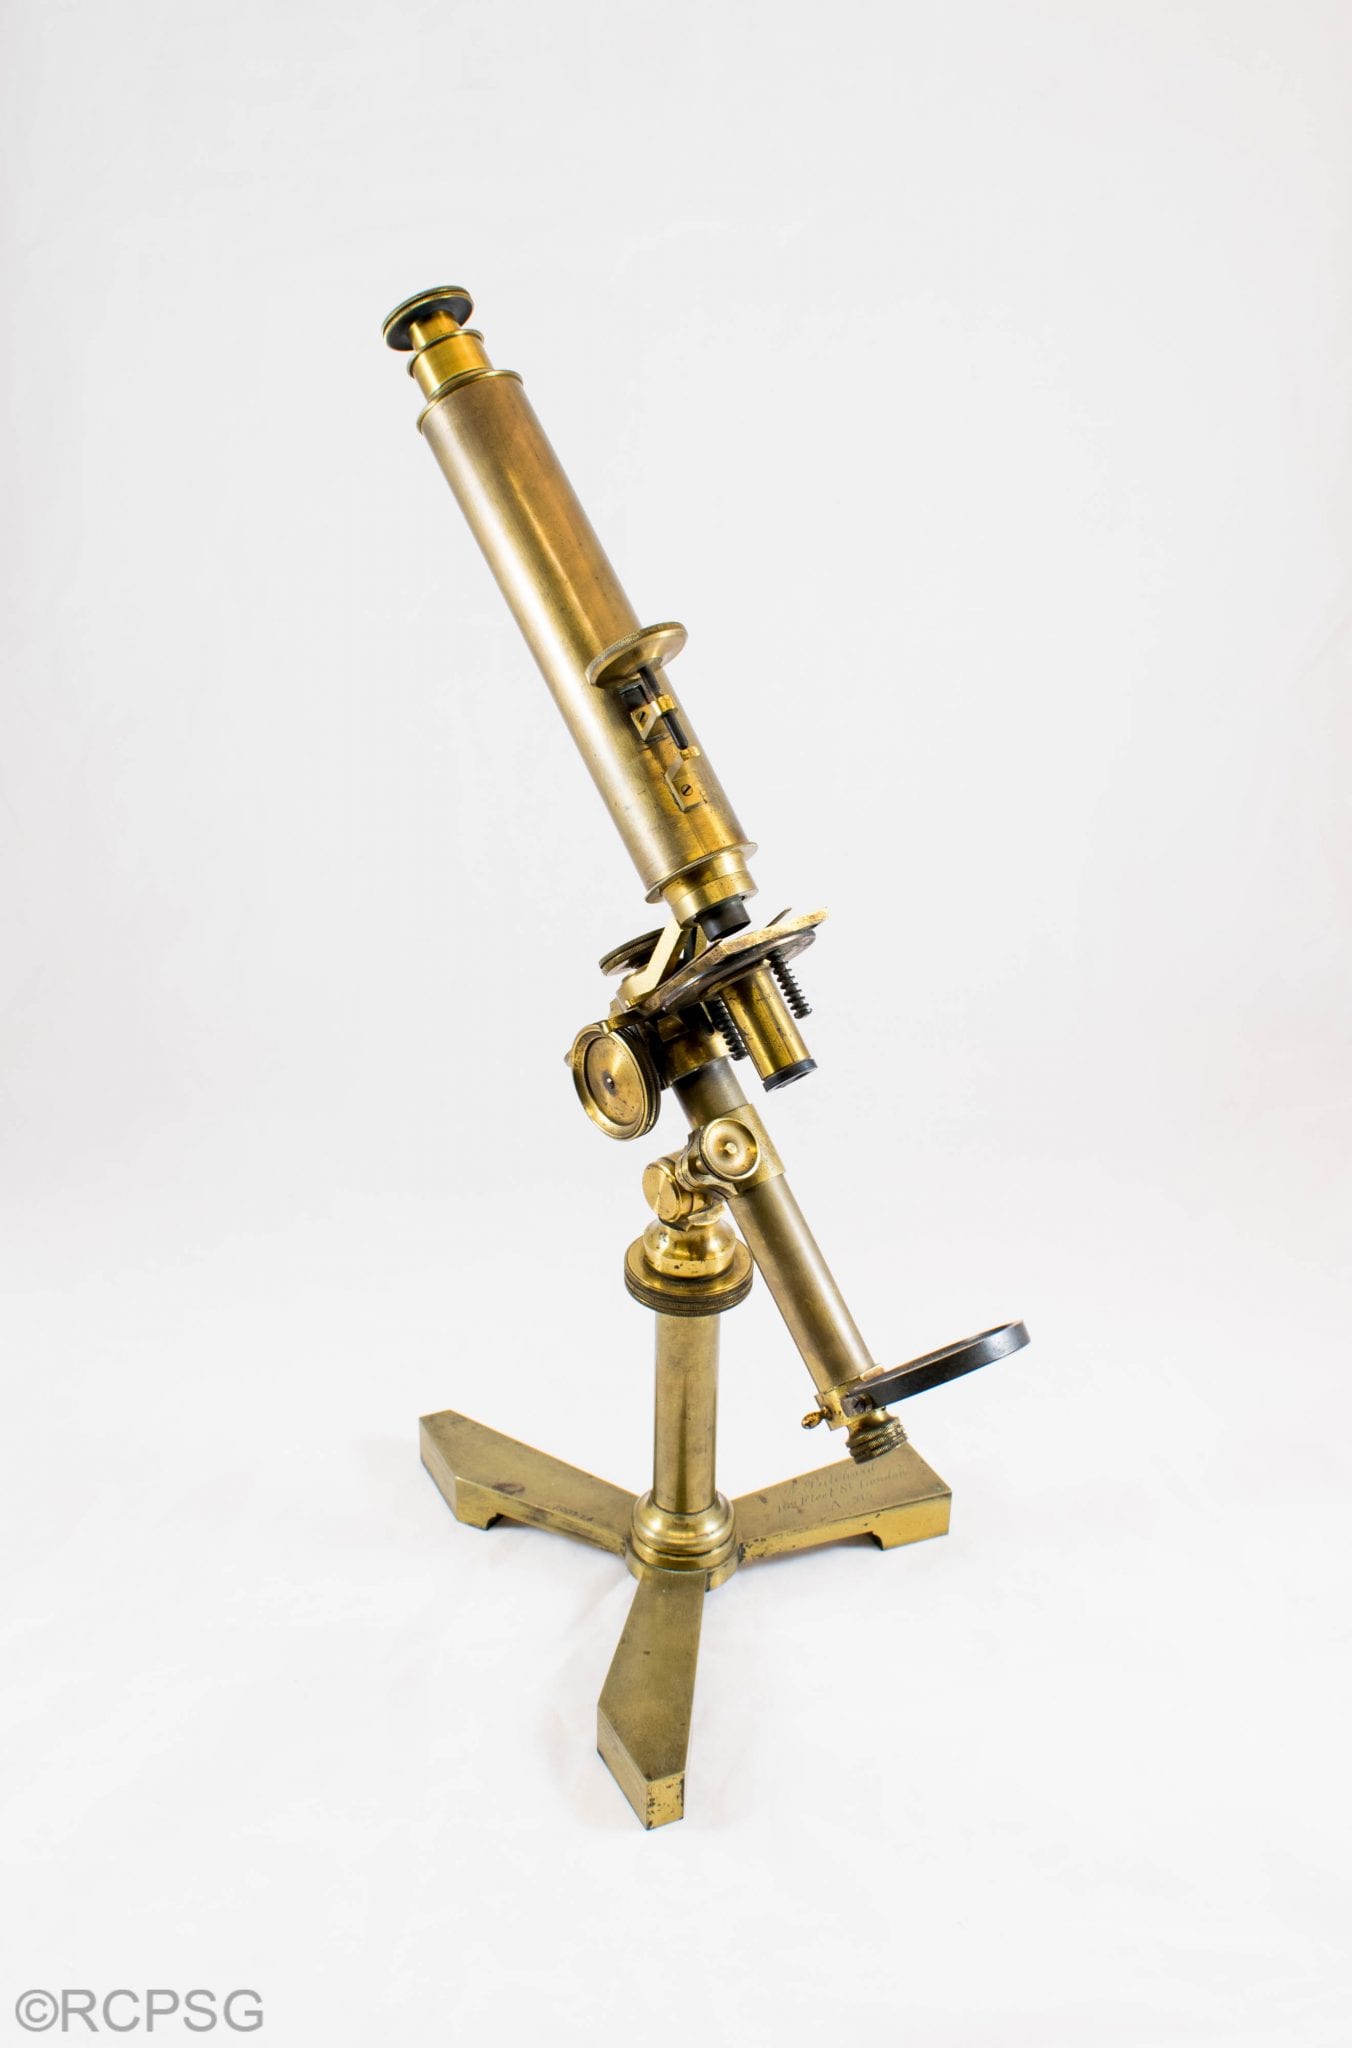 achromatic microscope manufactured by Andrew Pritchard